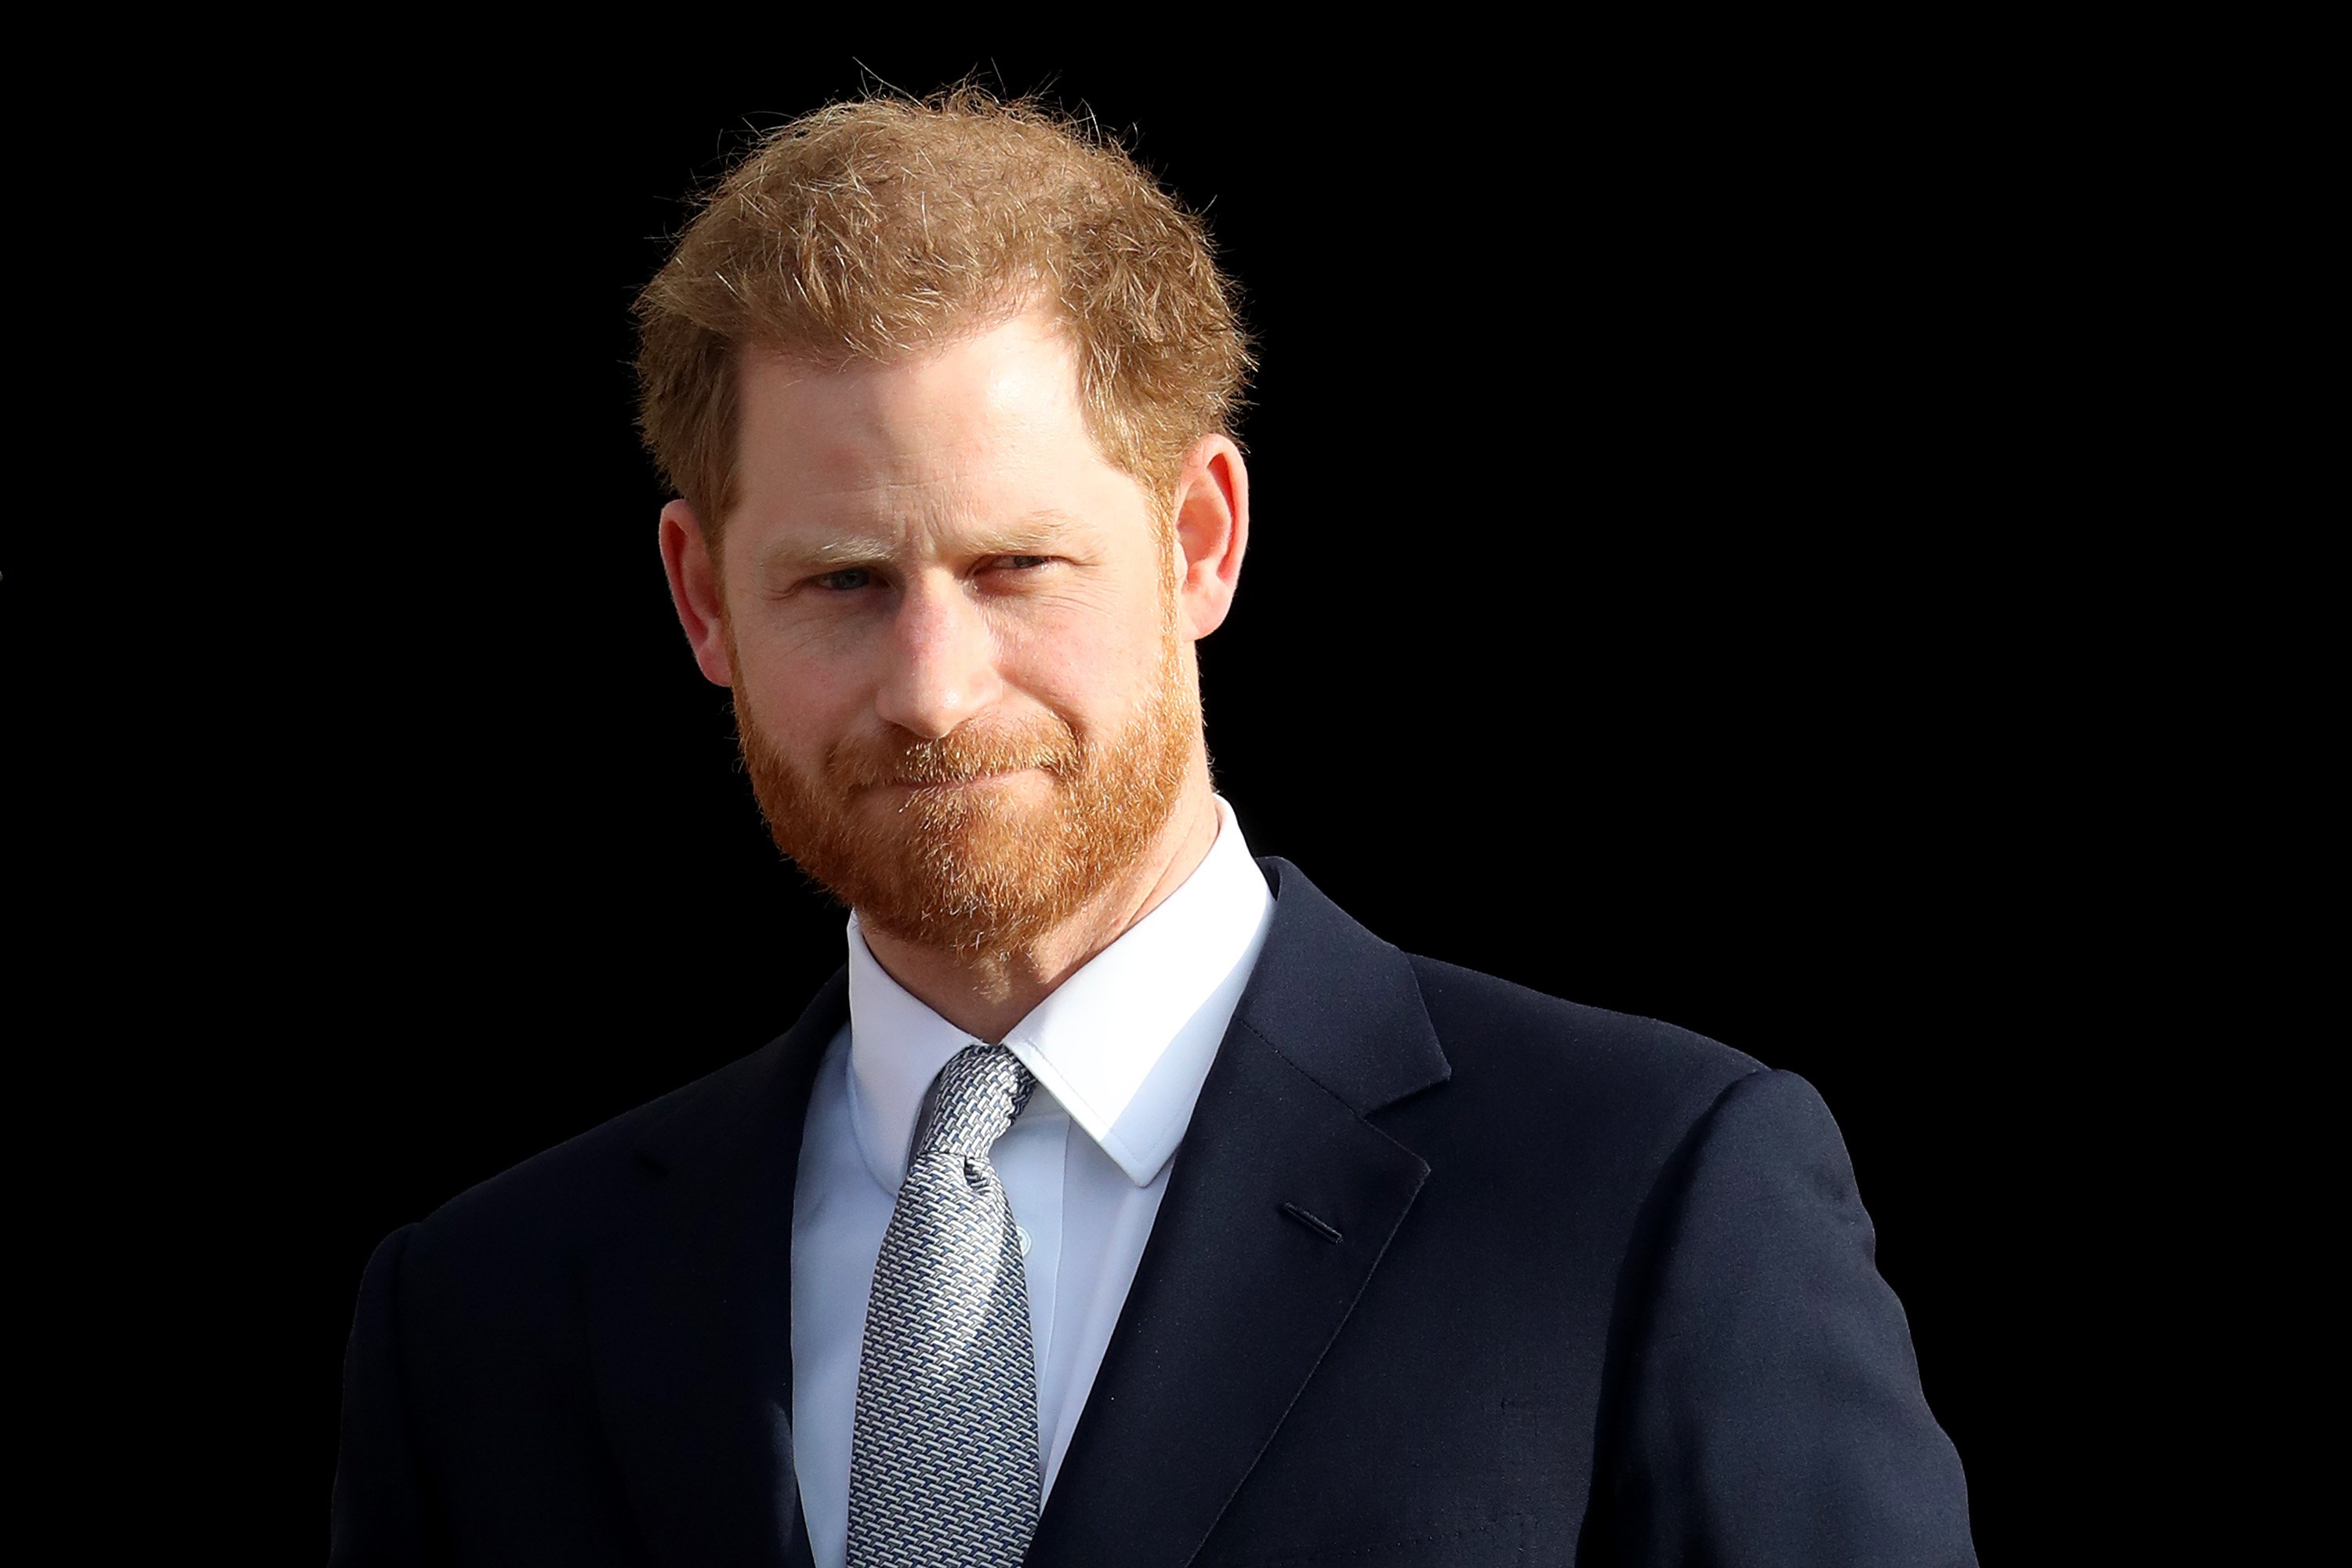 Prince Harry hosts the Rugby League World Cup 2021.